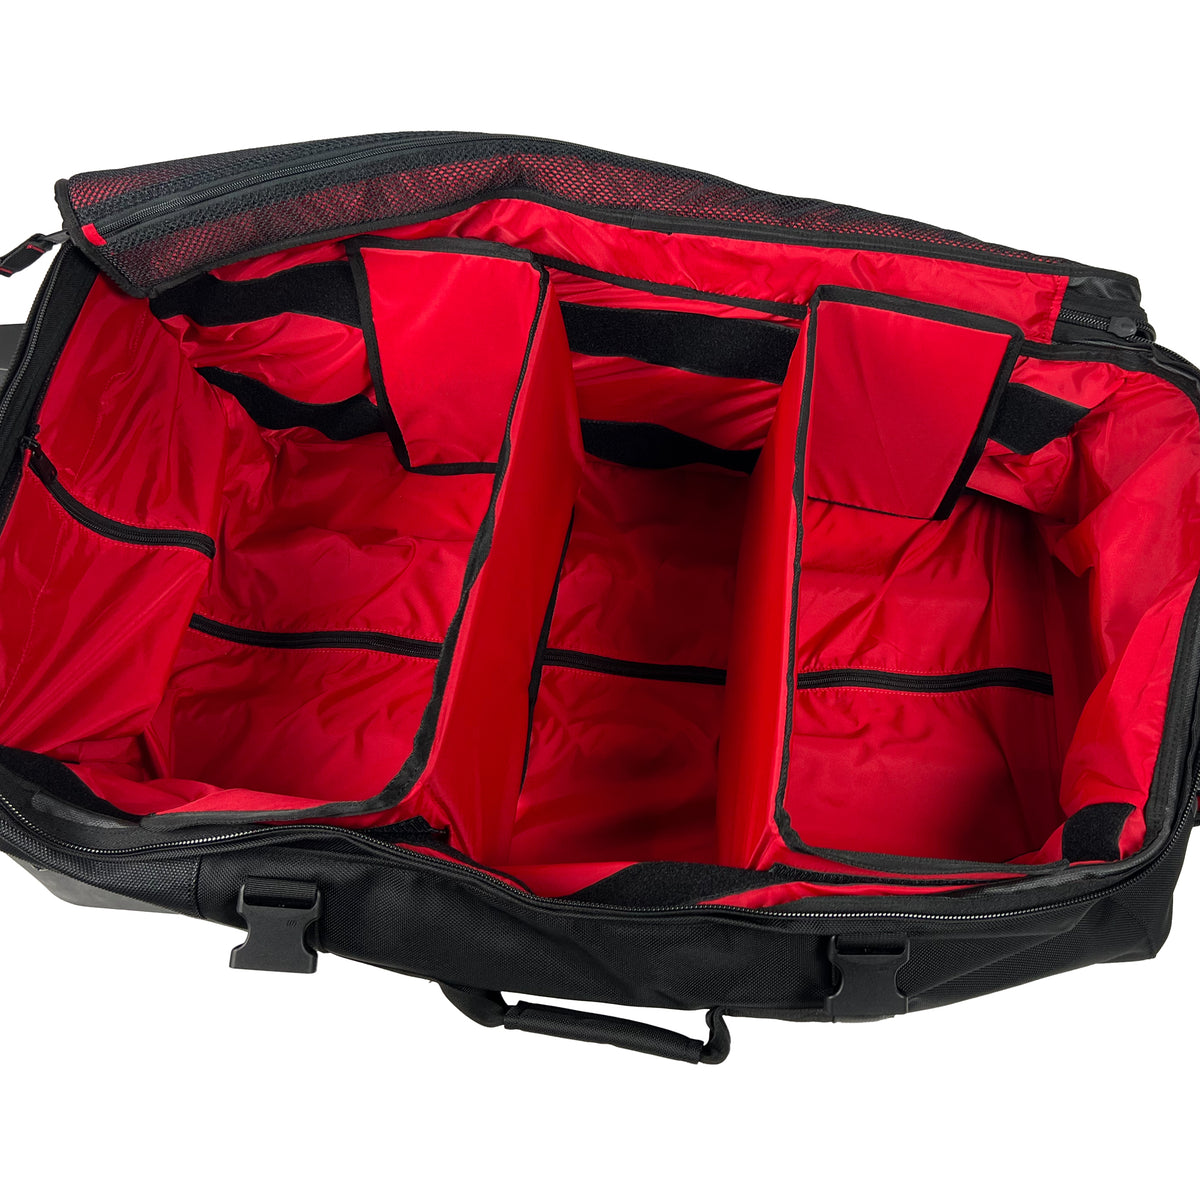 Wolfpack Gear™ Max Air Inside with movable dividers